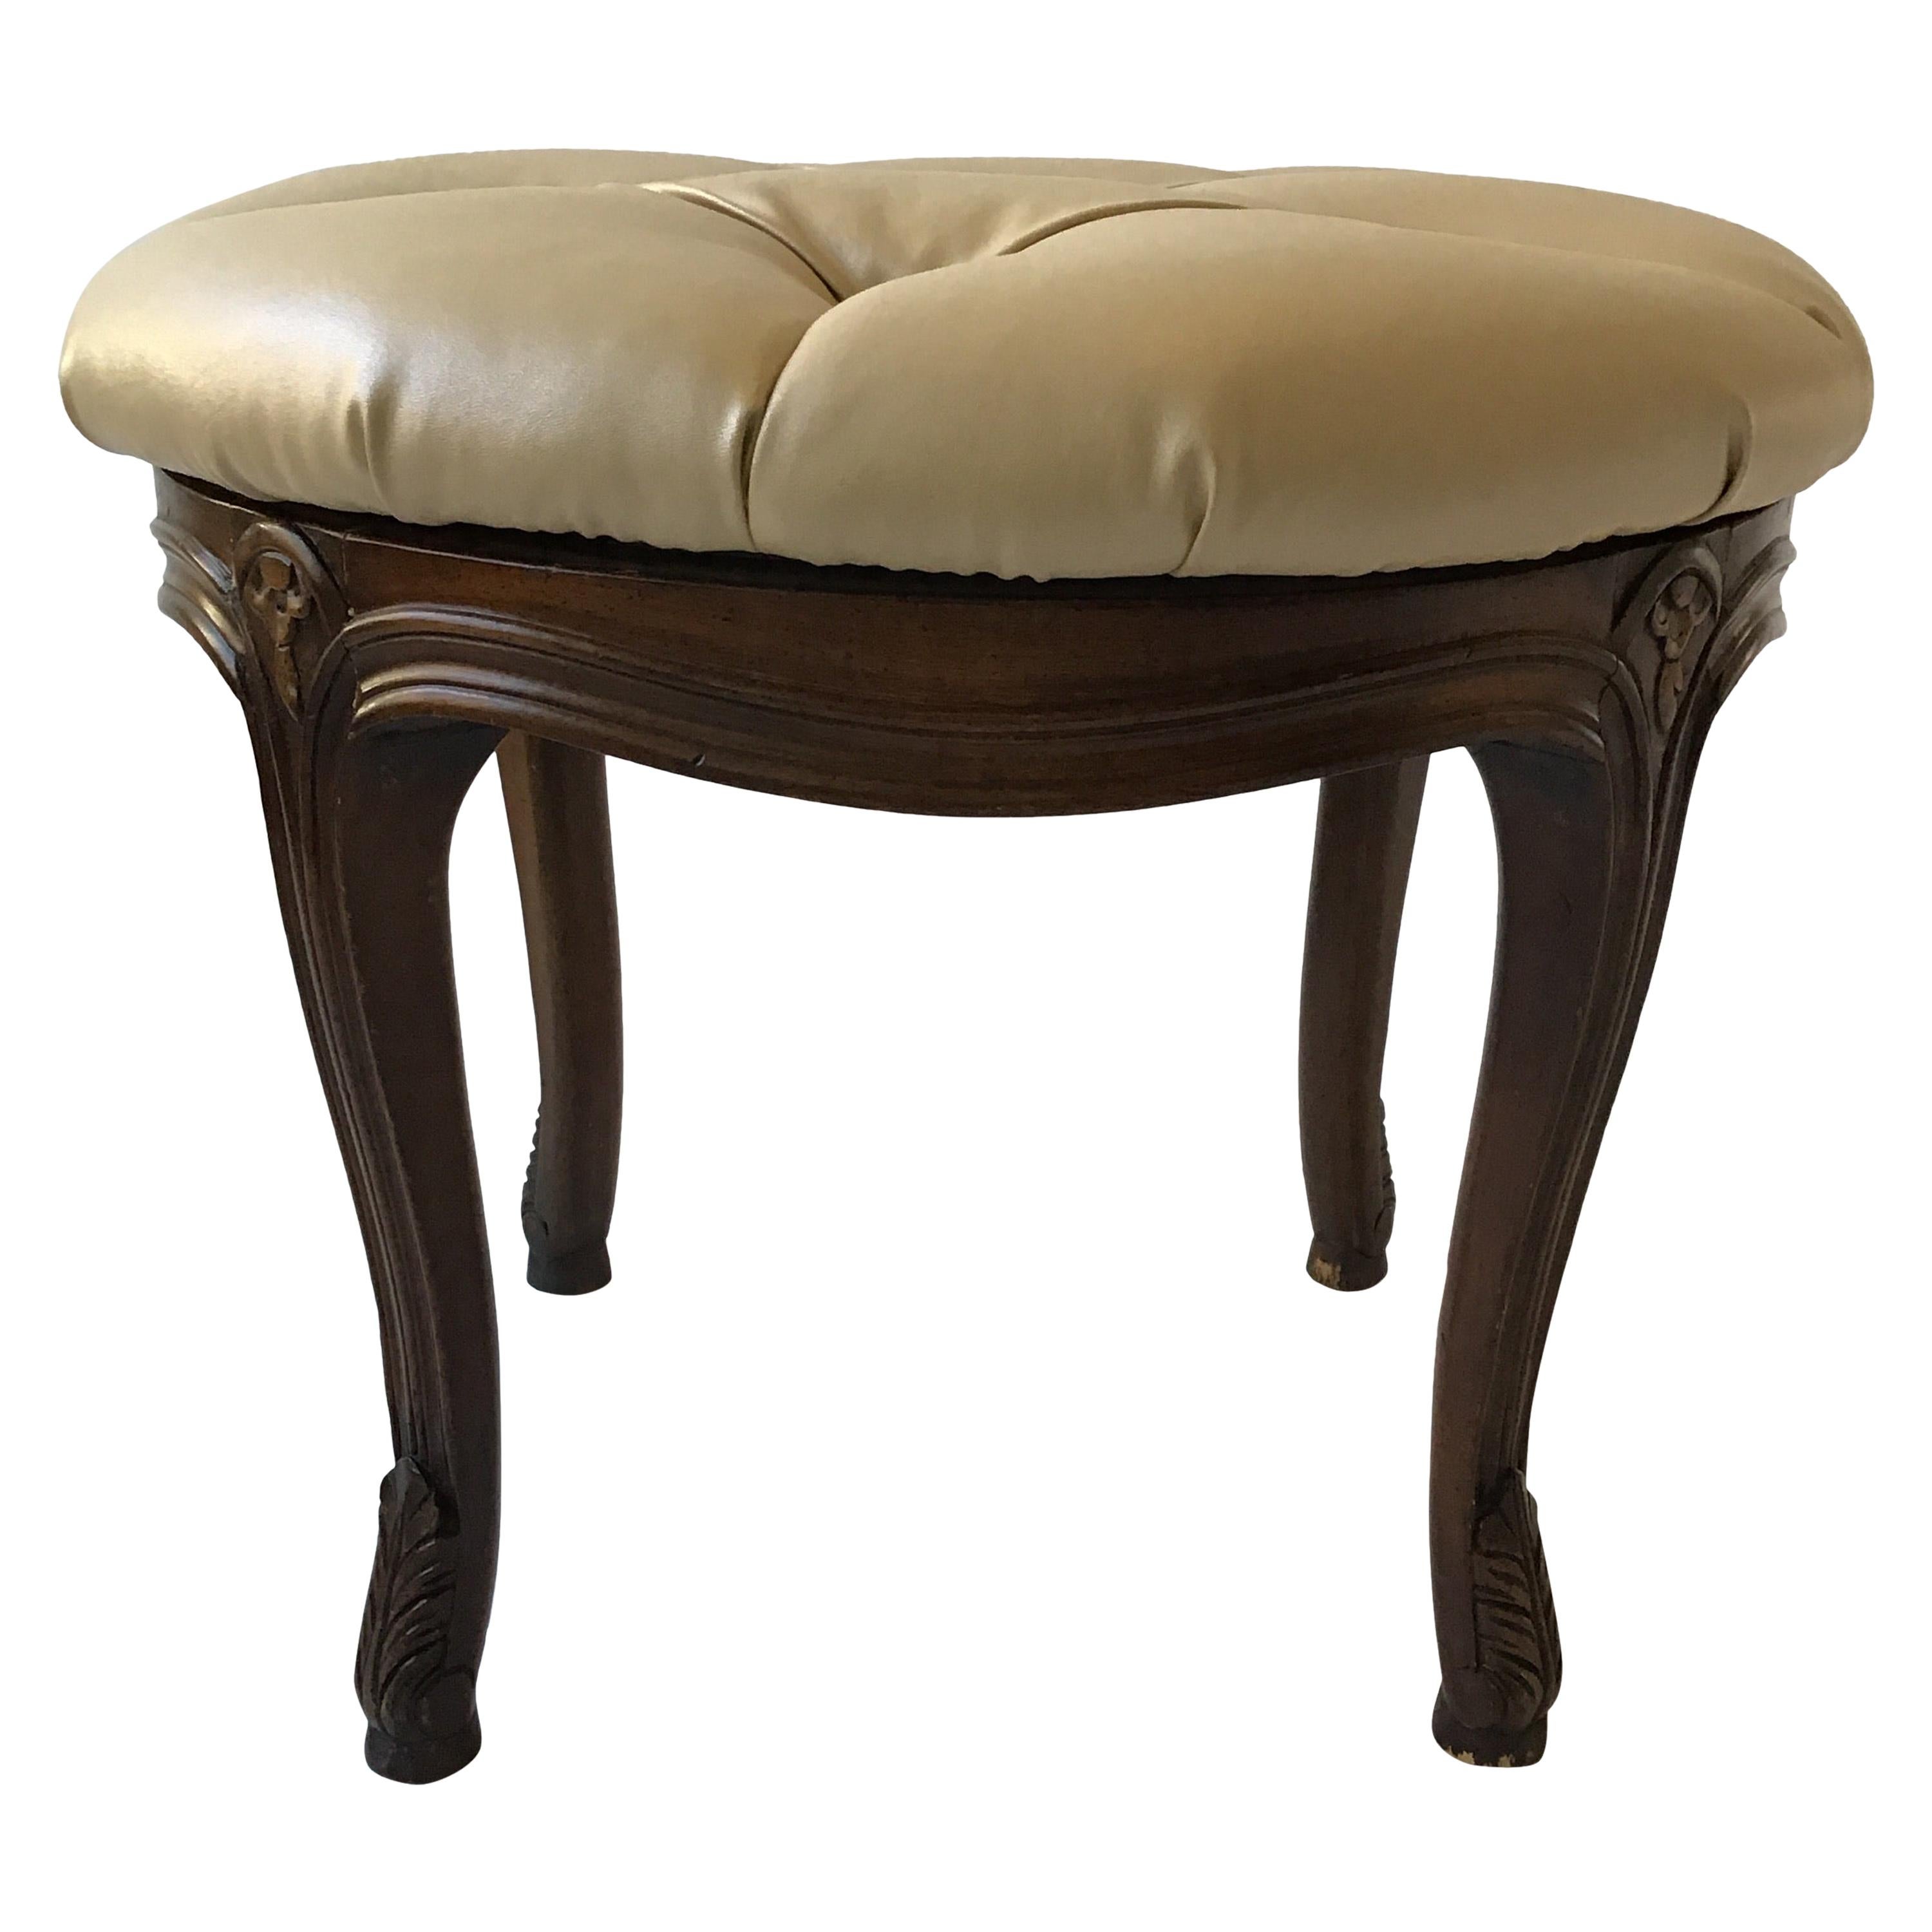 French Style Carved Wood Ottoman With Revolving Seat